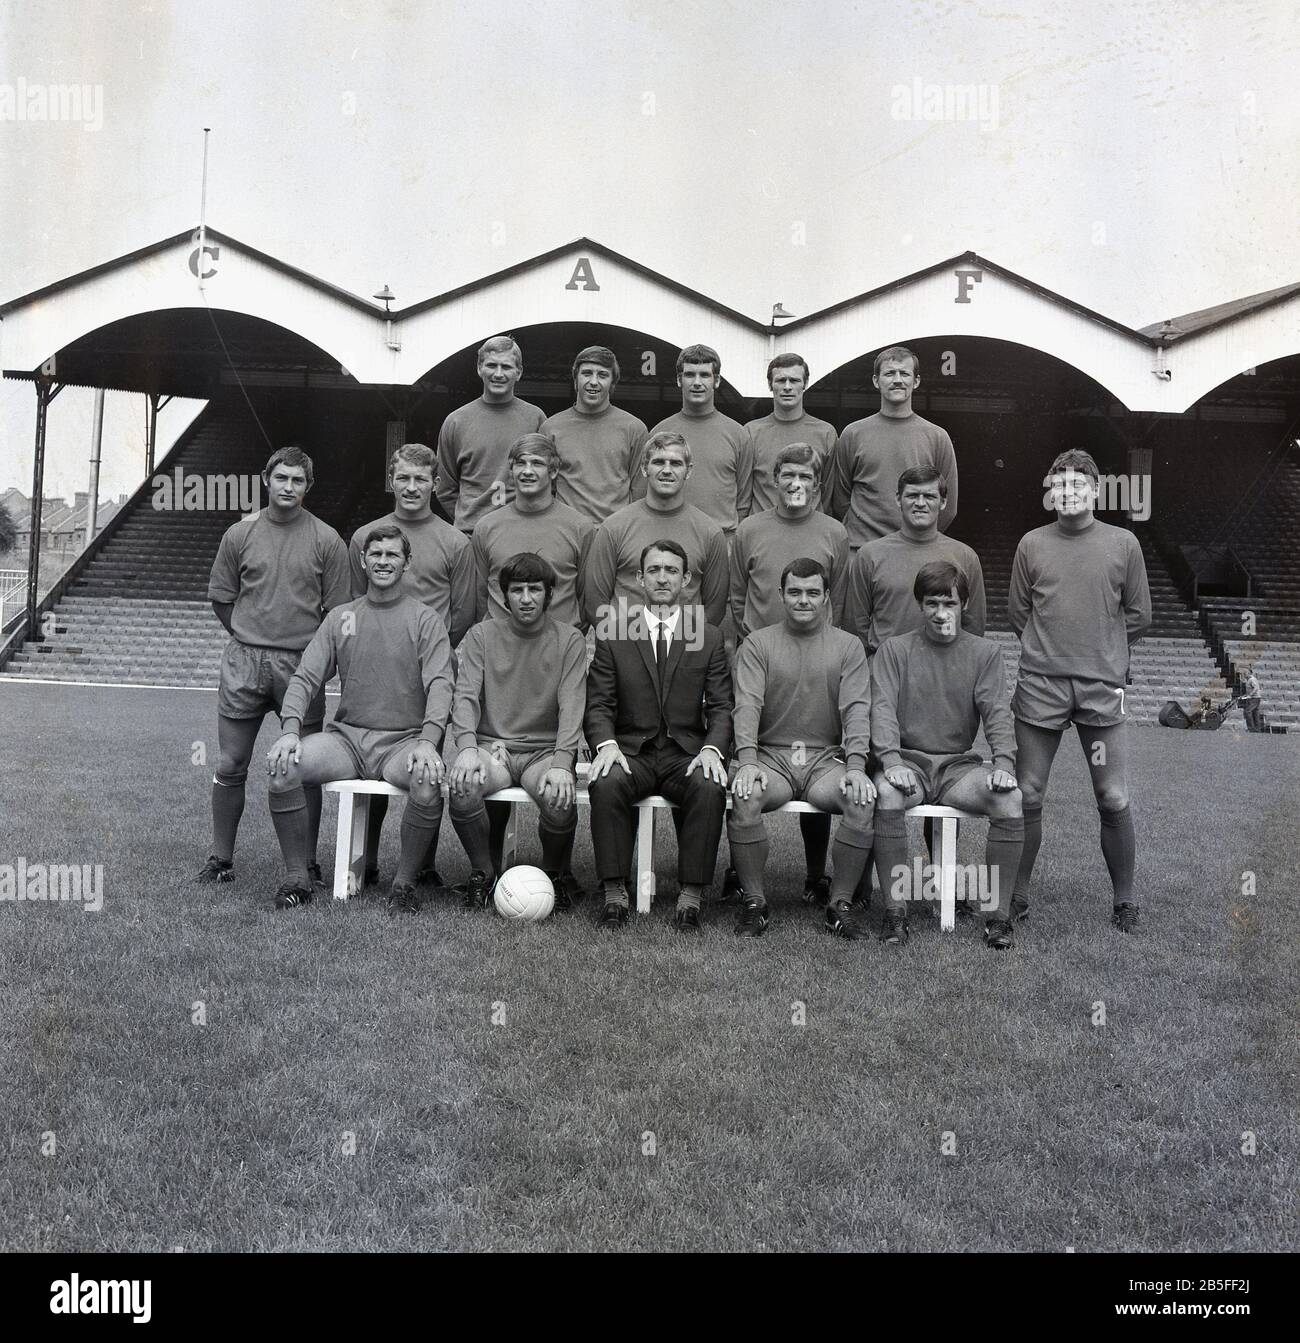 1968? historical, Charlton FC, new season, first team squad group photo at the valley, South London, England, UK. Stock Photo